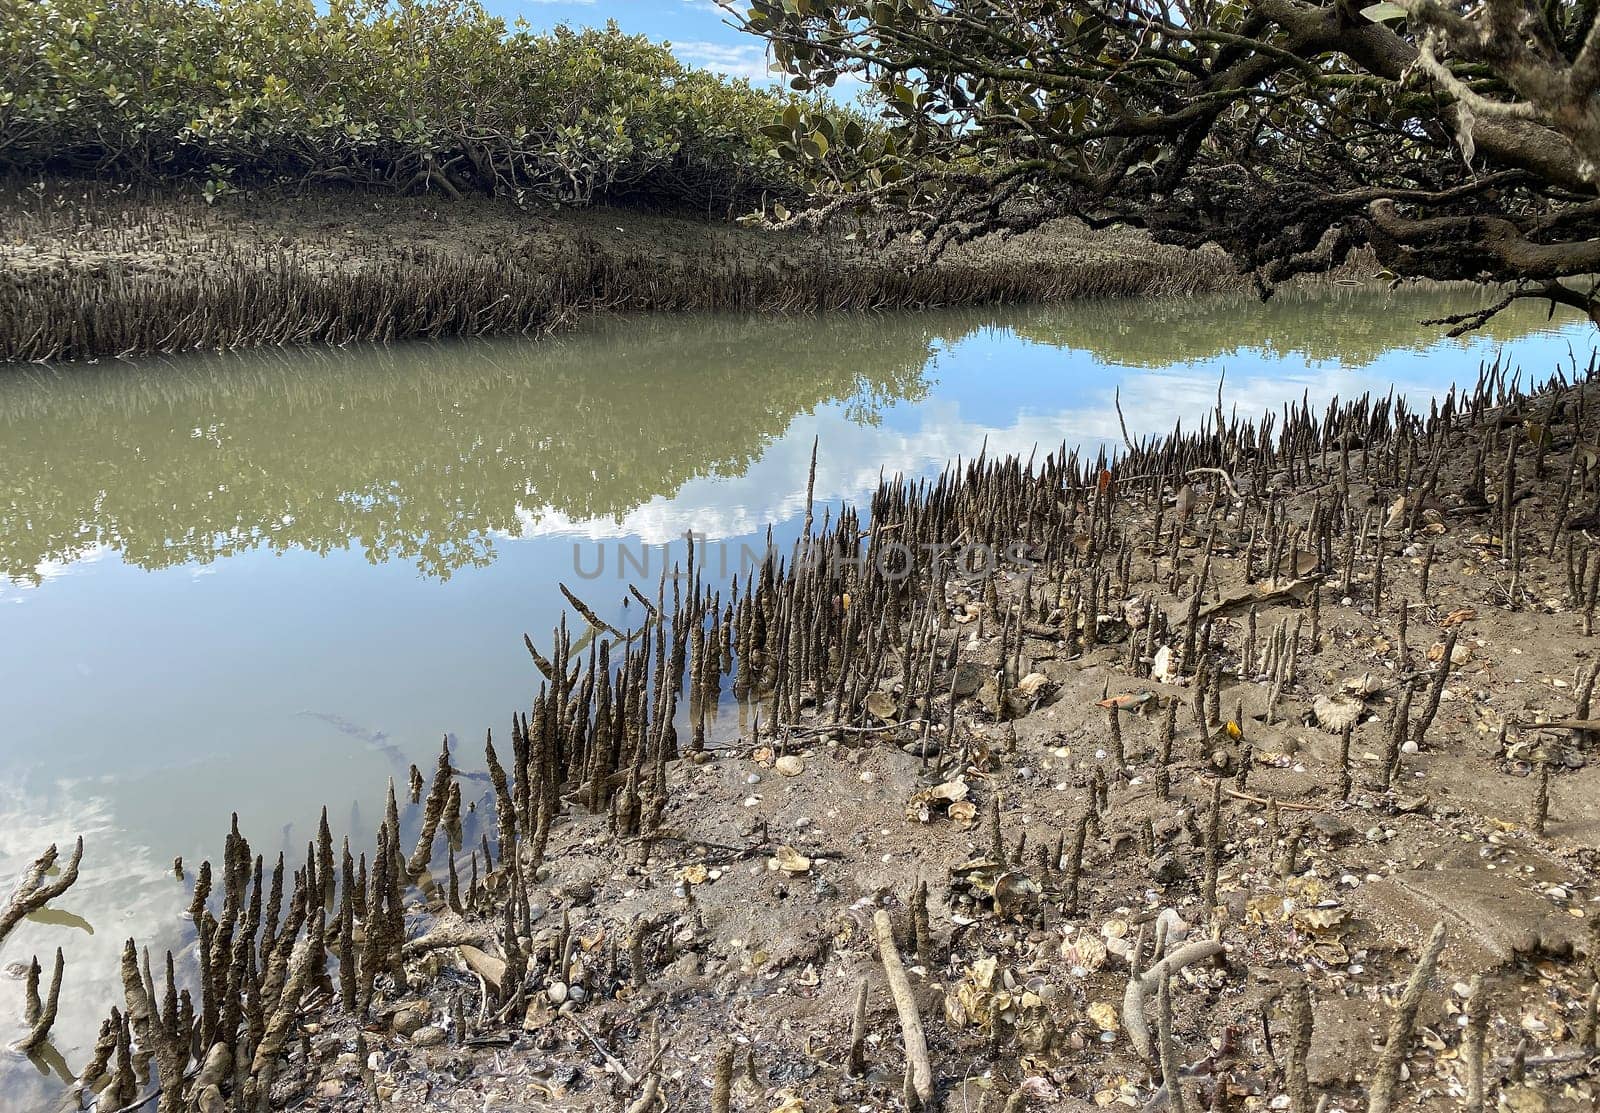 Green young Mangrove trees and pnematophores - roots growing from the bottom up for gas exchange. Planting mangroves in coastal sea lane, New Zealand.